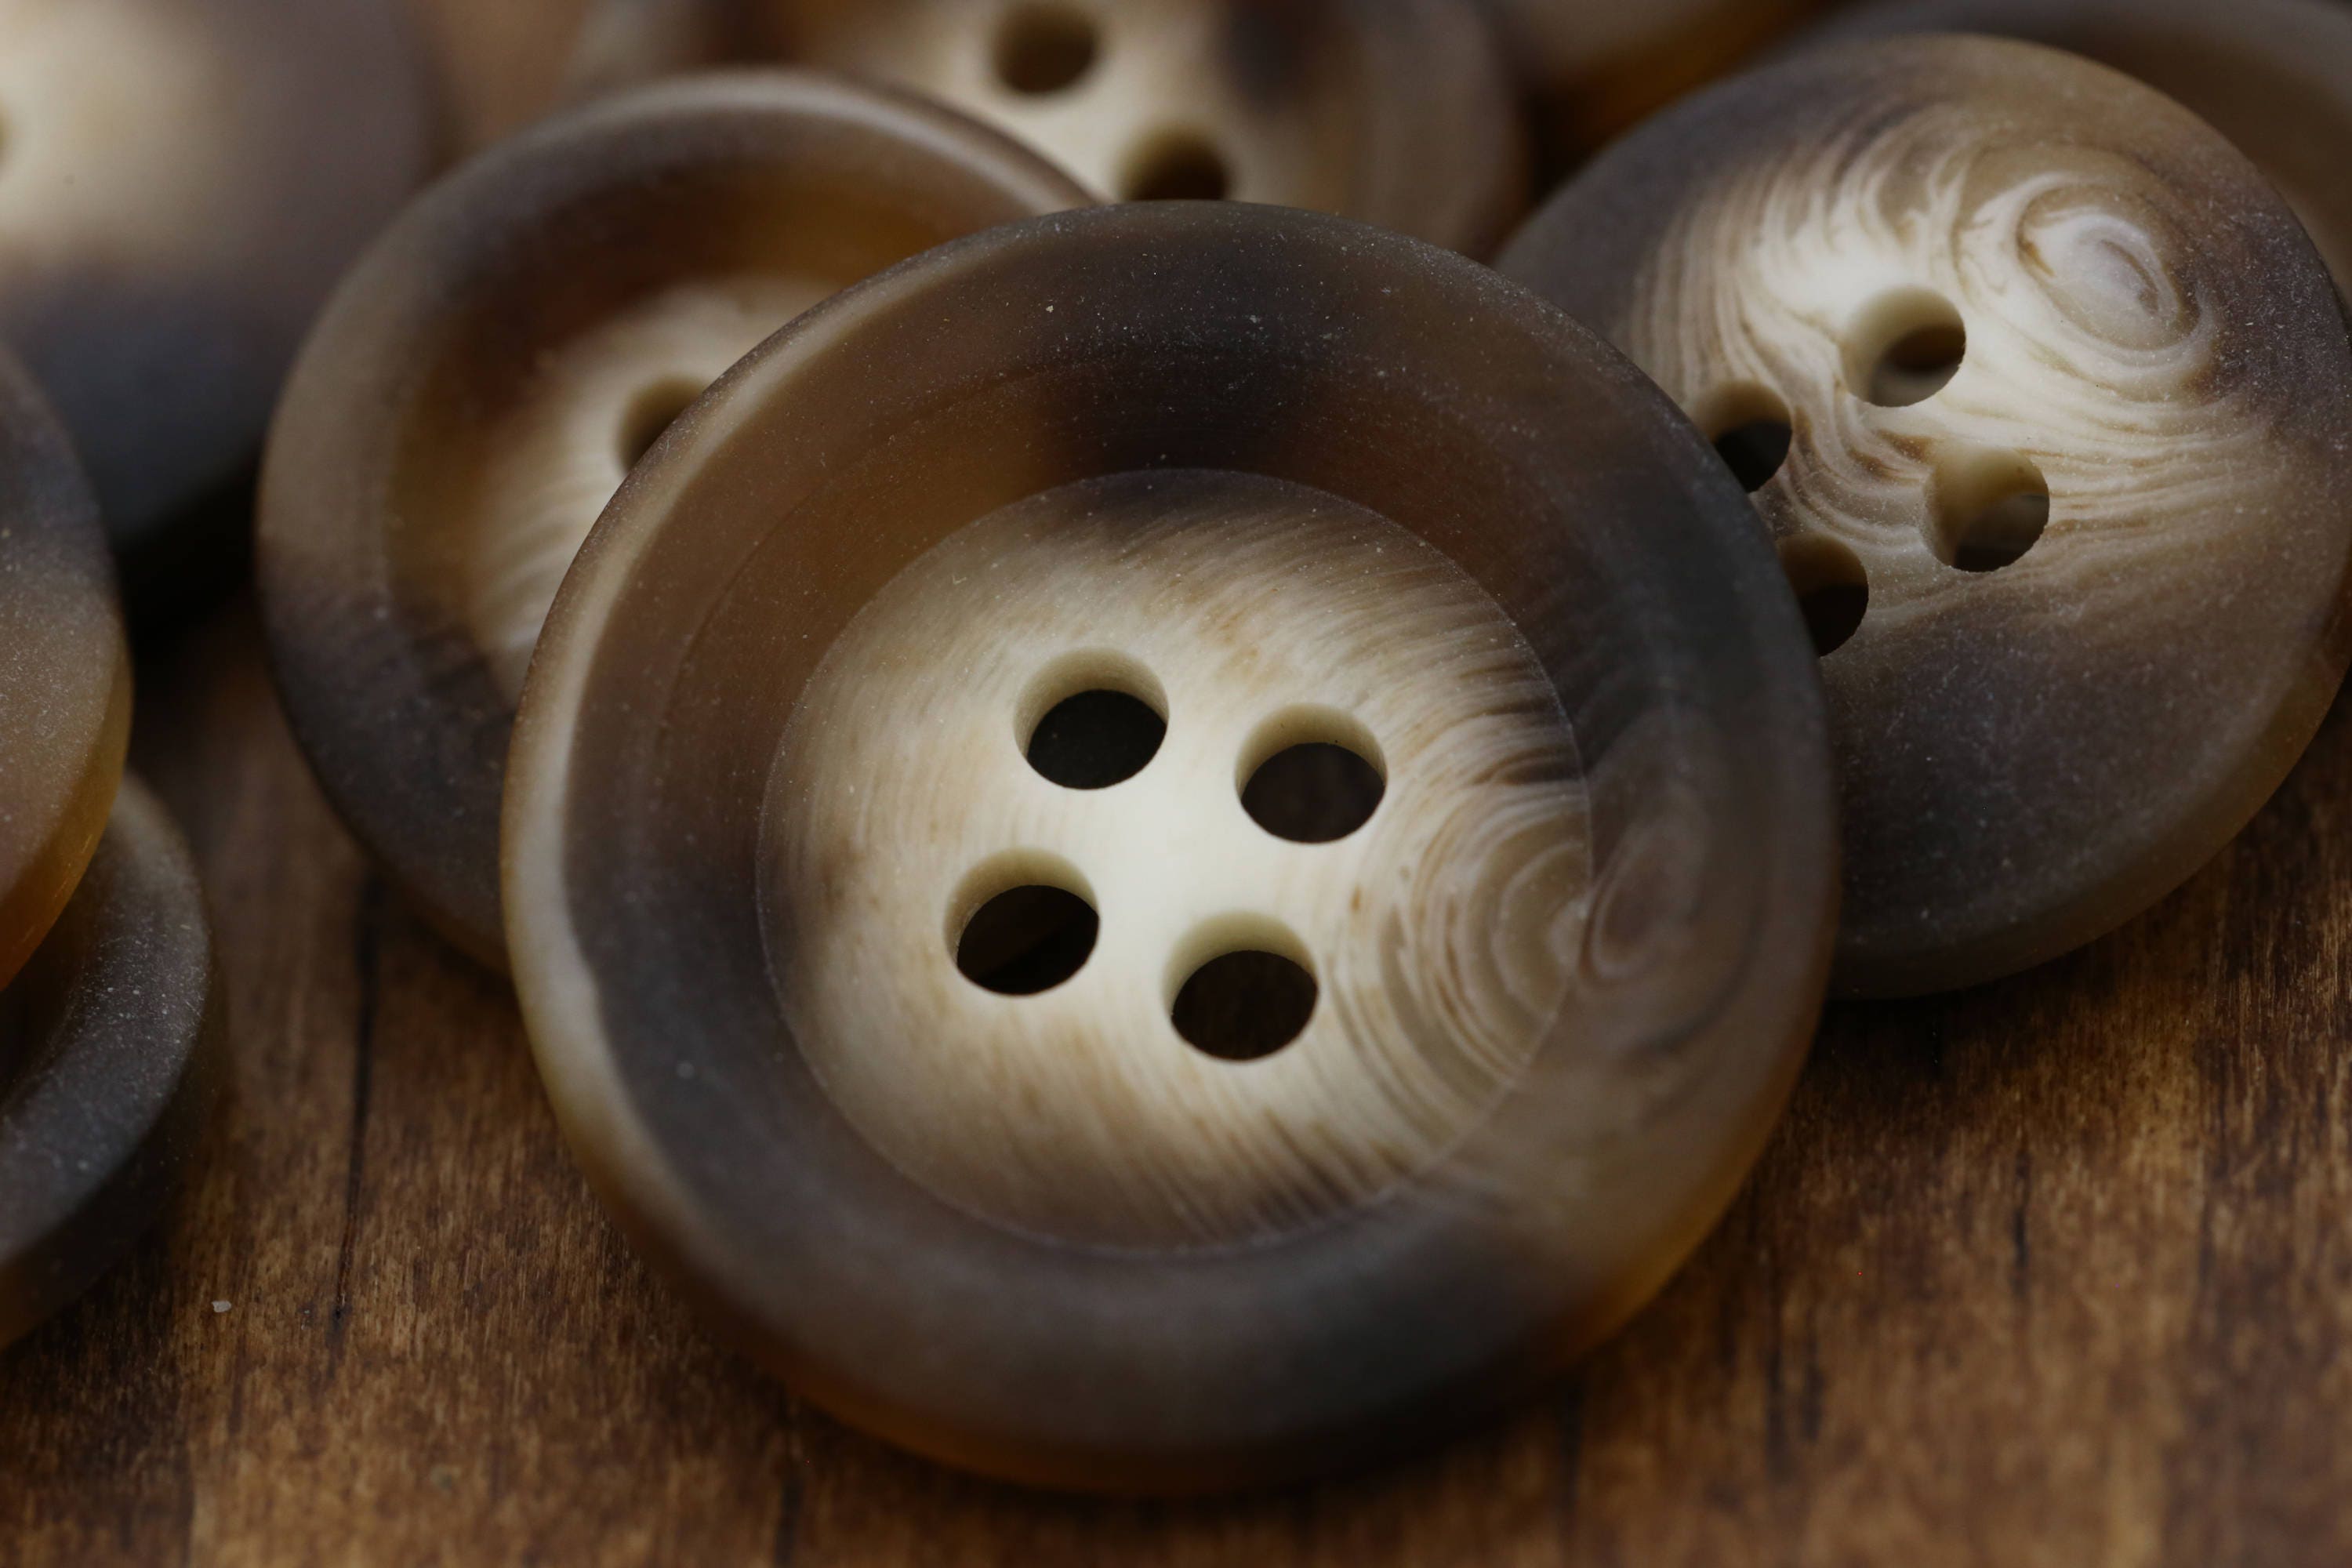 One Dozen Marbled Brown Buttons - 7/8 Nickle Sized Wood-like Brown Bu —  Leather Unlimited